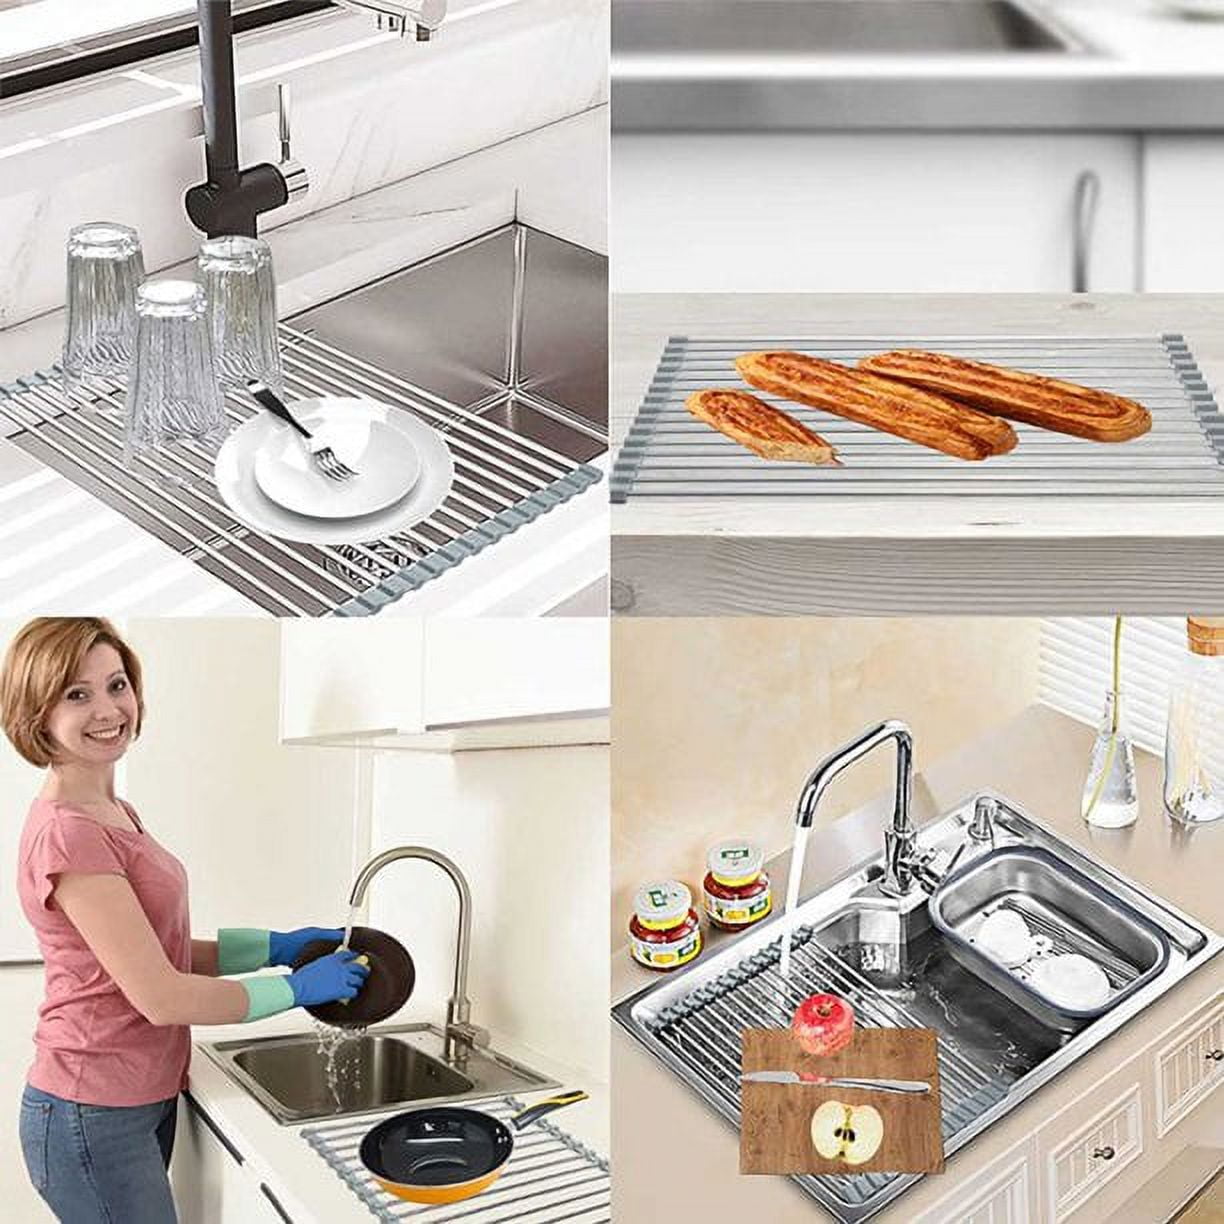  Roll Up Dish Drying Rack Over The Sink with Utensil Holder  Folding Dish Rack Dish Drainer for Kitchen Sink Counter Roll-Up Drying Rack  Foldable Dish Drying Rack Stainless Steel (20x11)